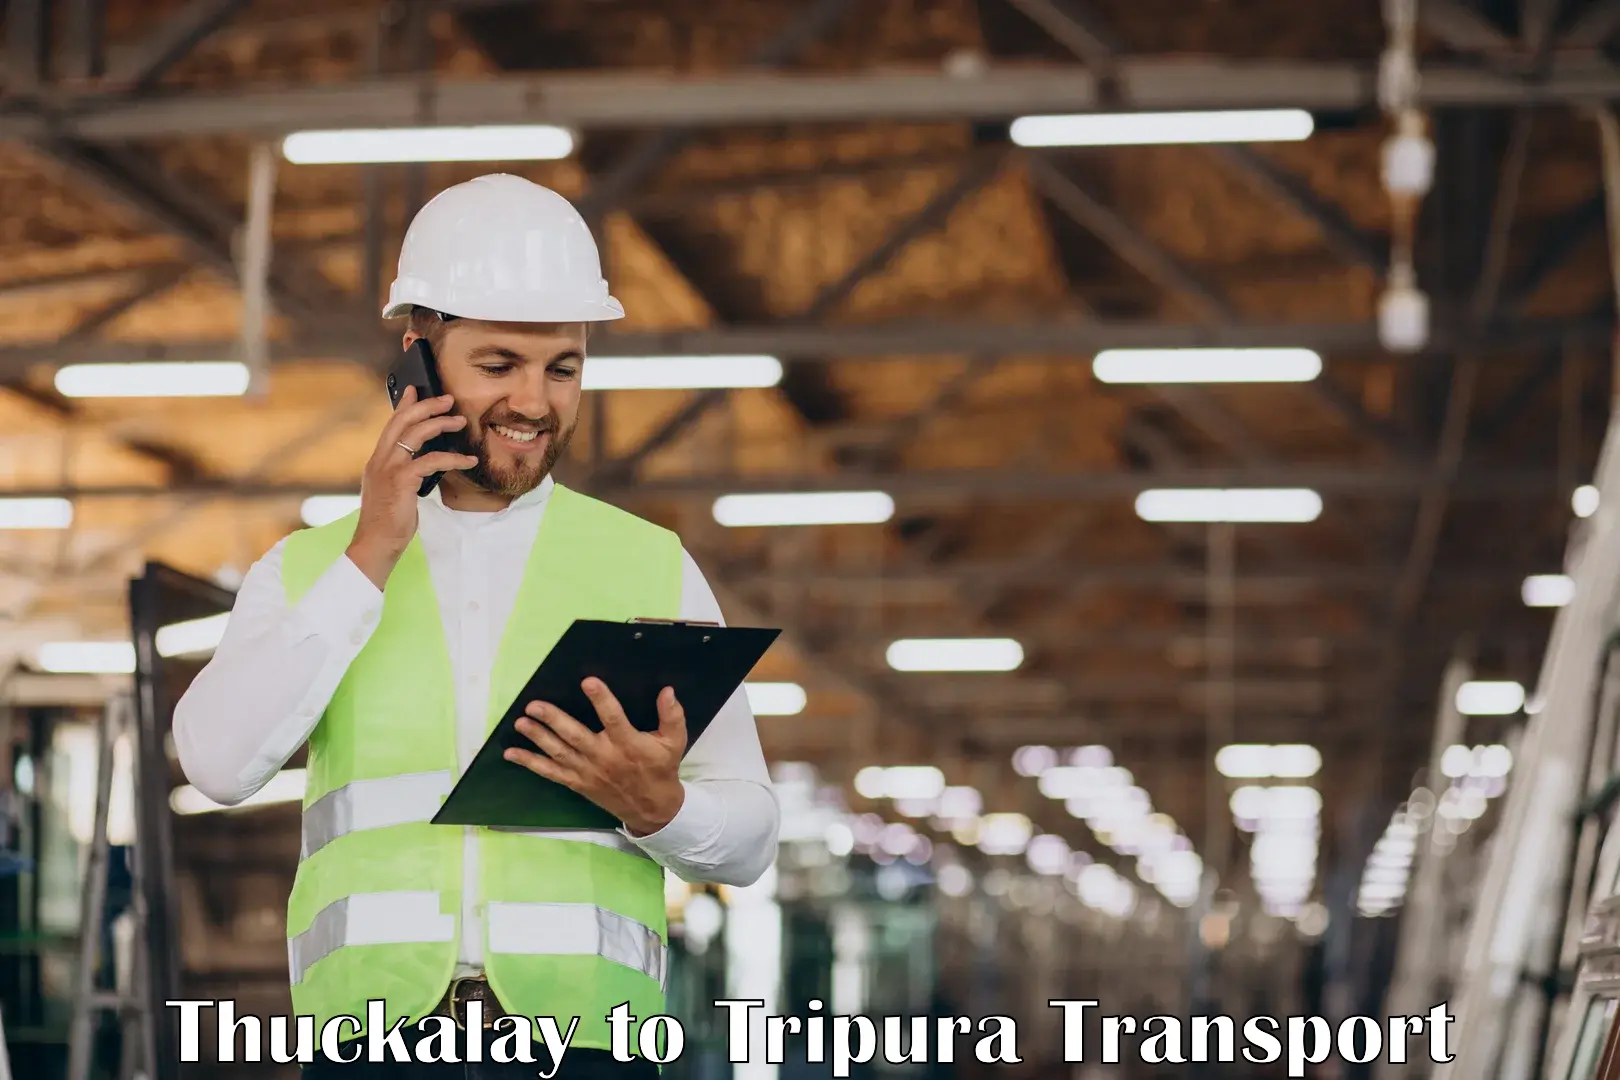 Parcel transport services Thuckalay to Udaipur Tripura